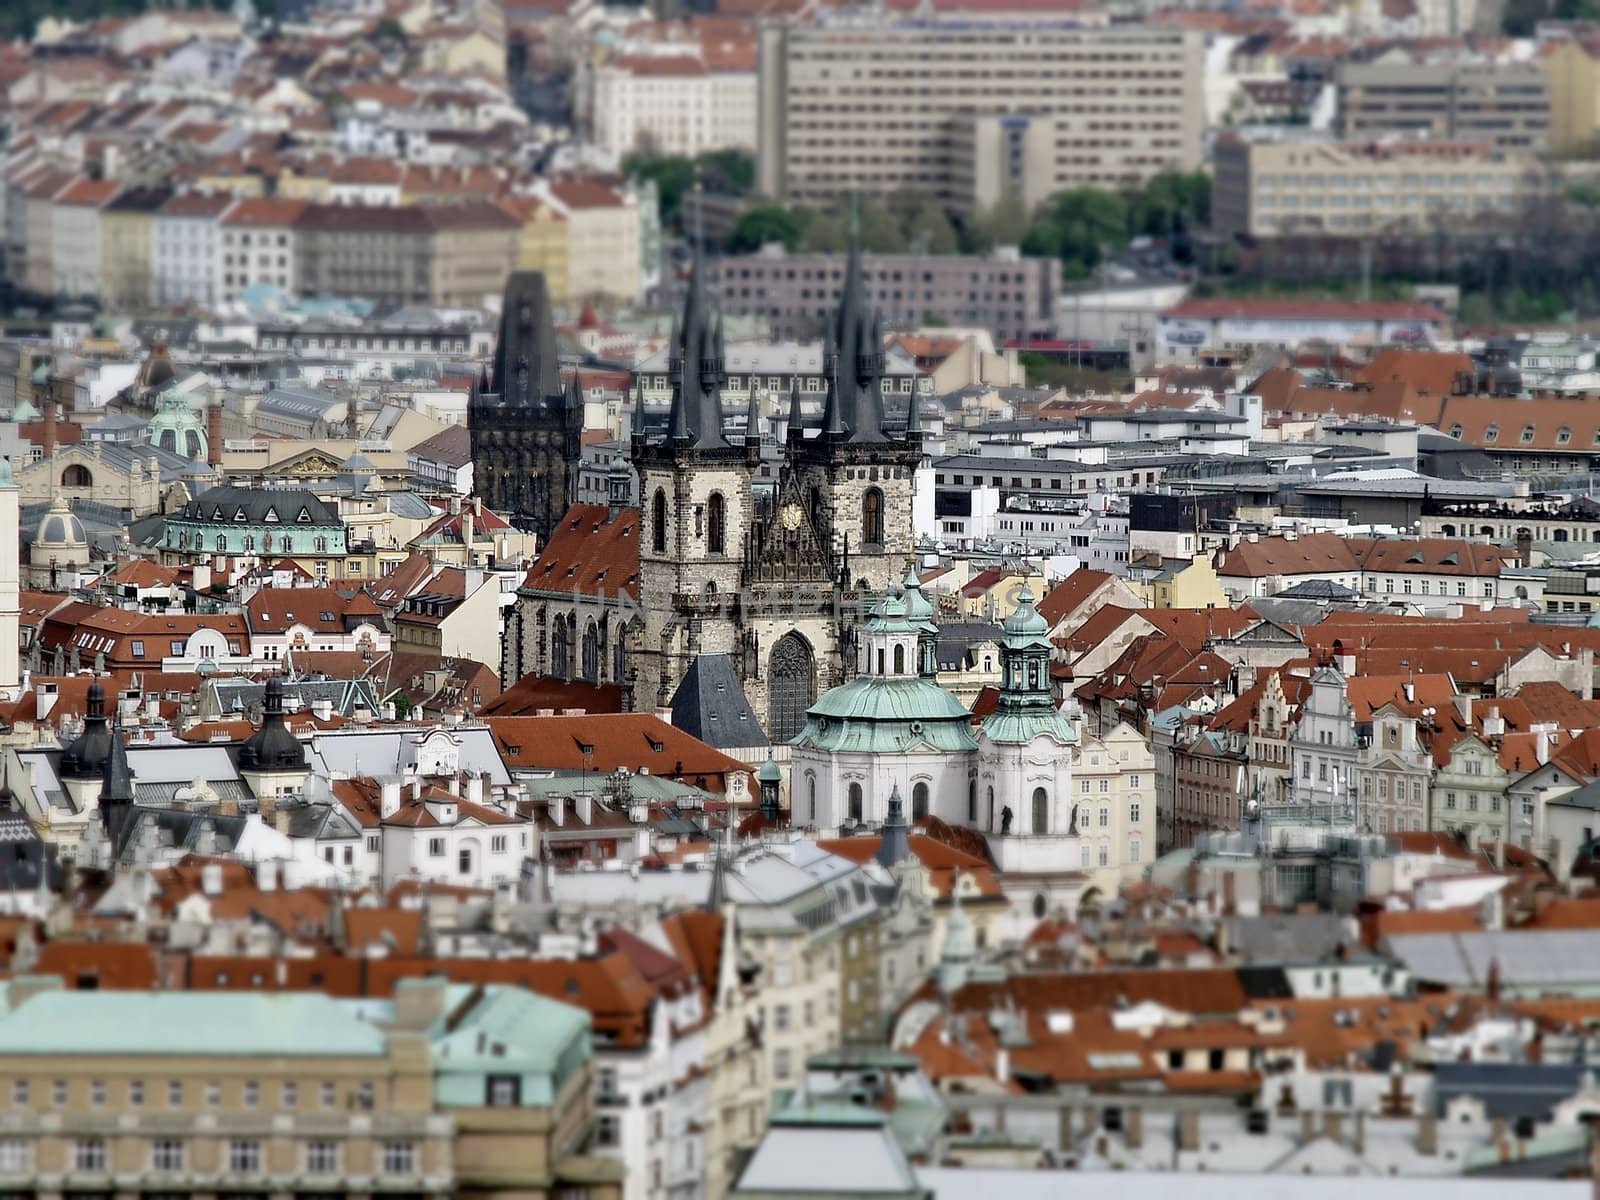 City of Prague from above (made with tilt shift technology) by anderm